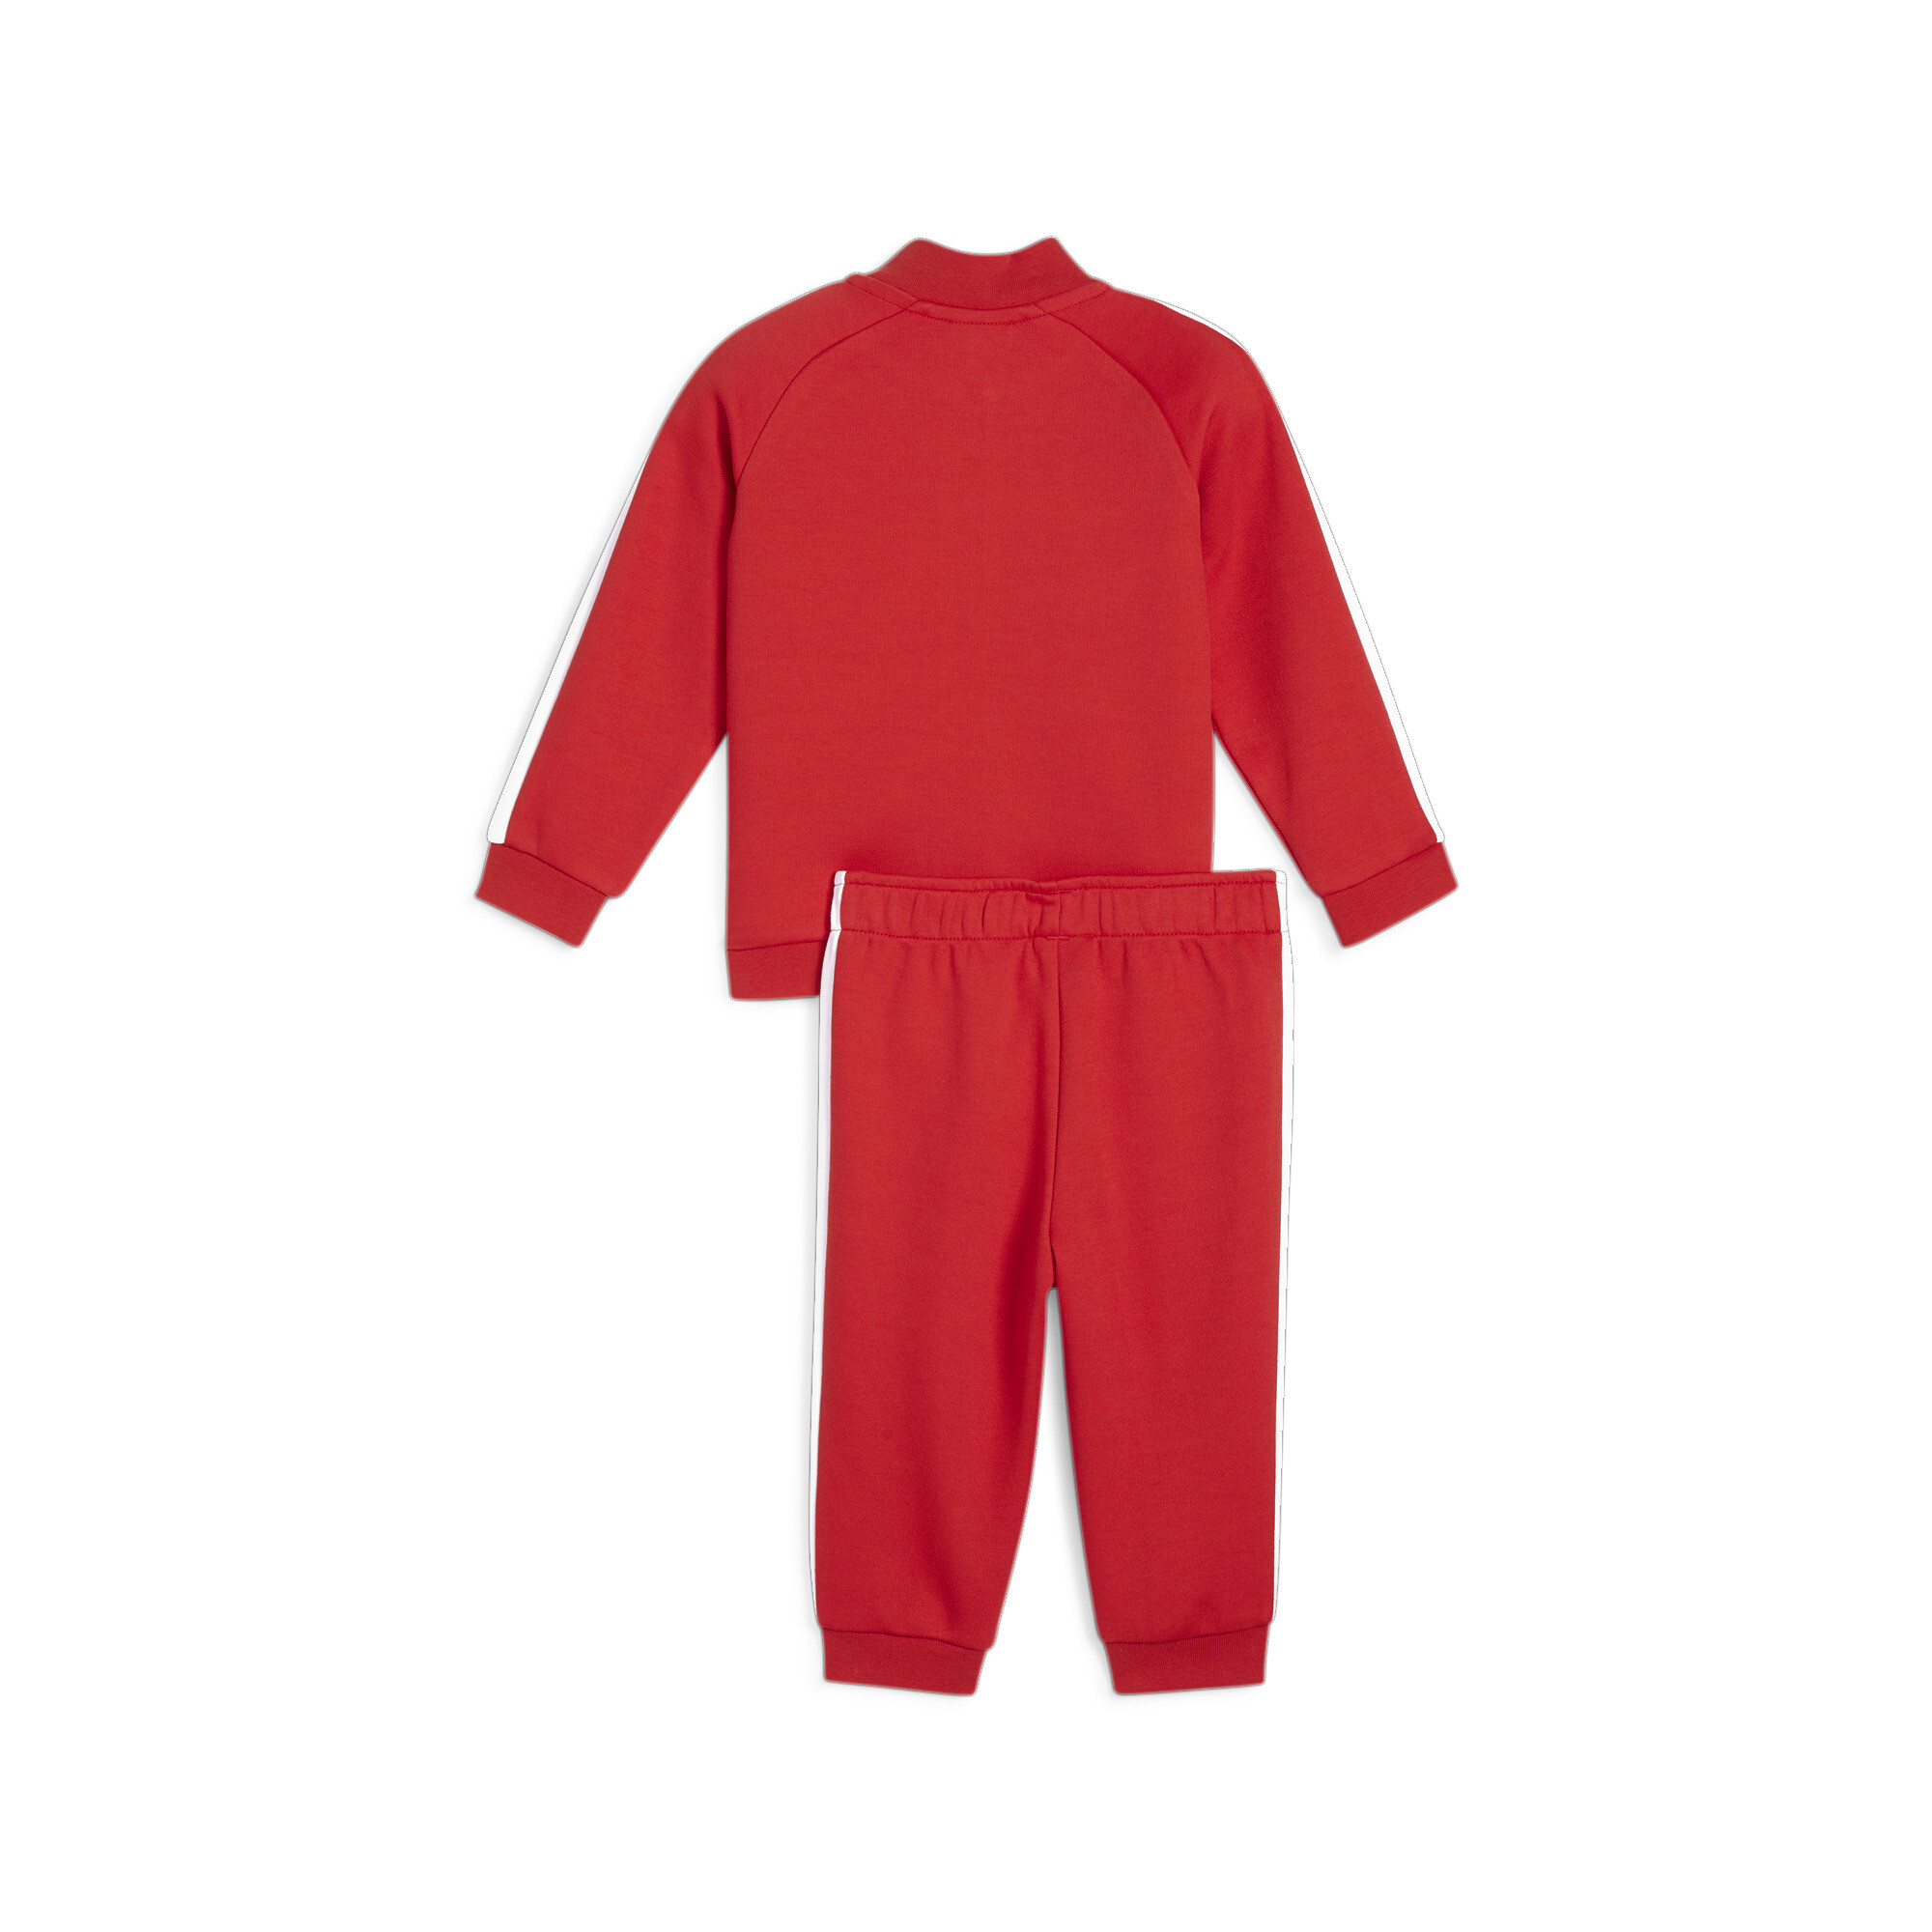 Puma MINICATS T7 ICONIC Baby Tracksuit Set, Red, Size 2-4M, Clothing